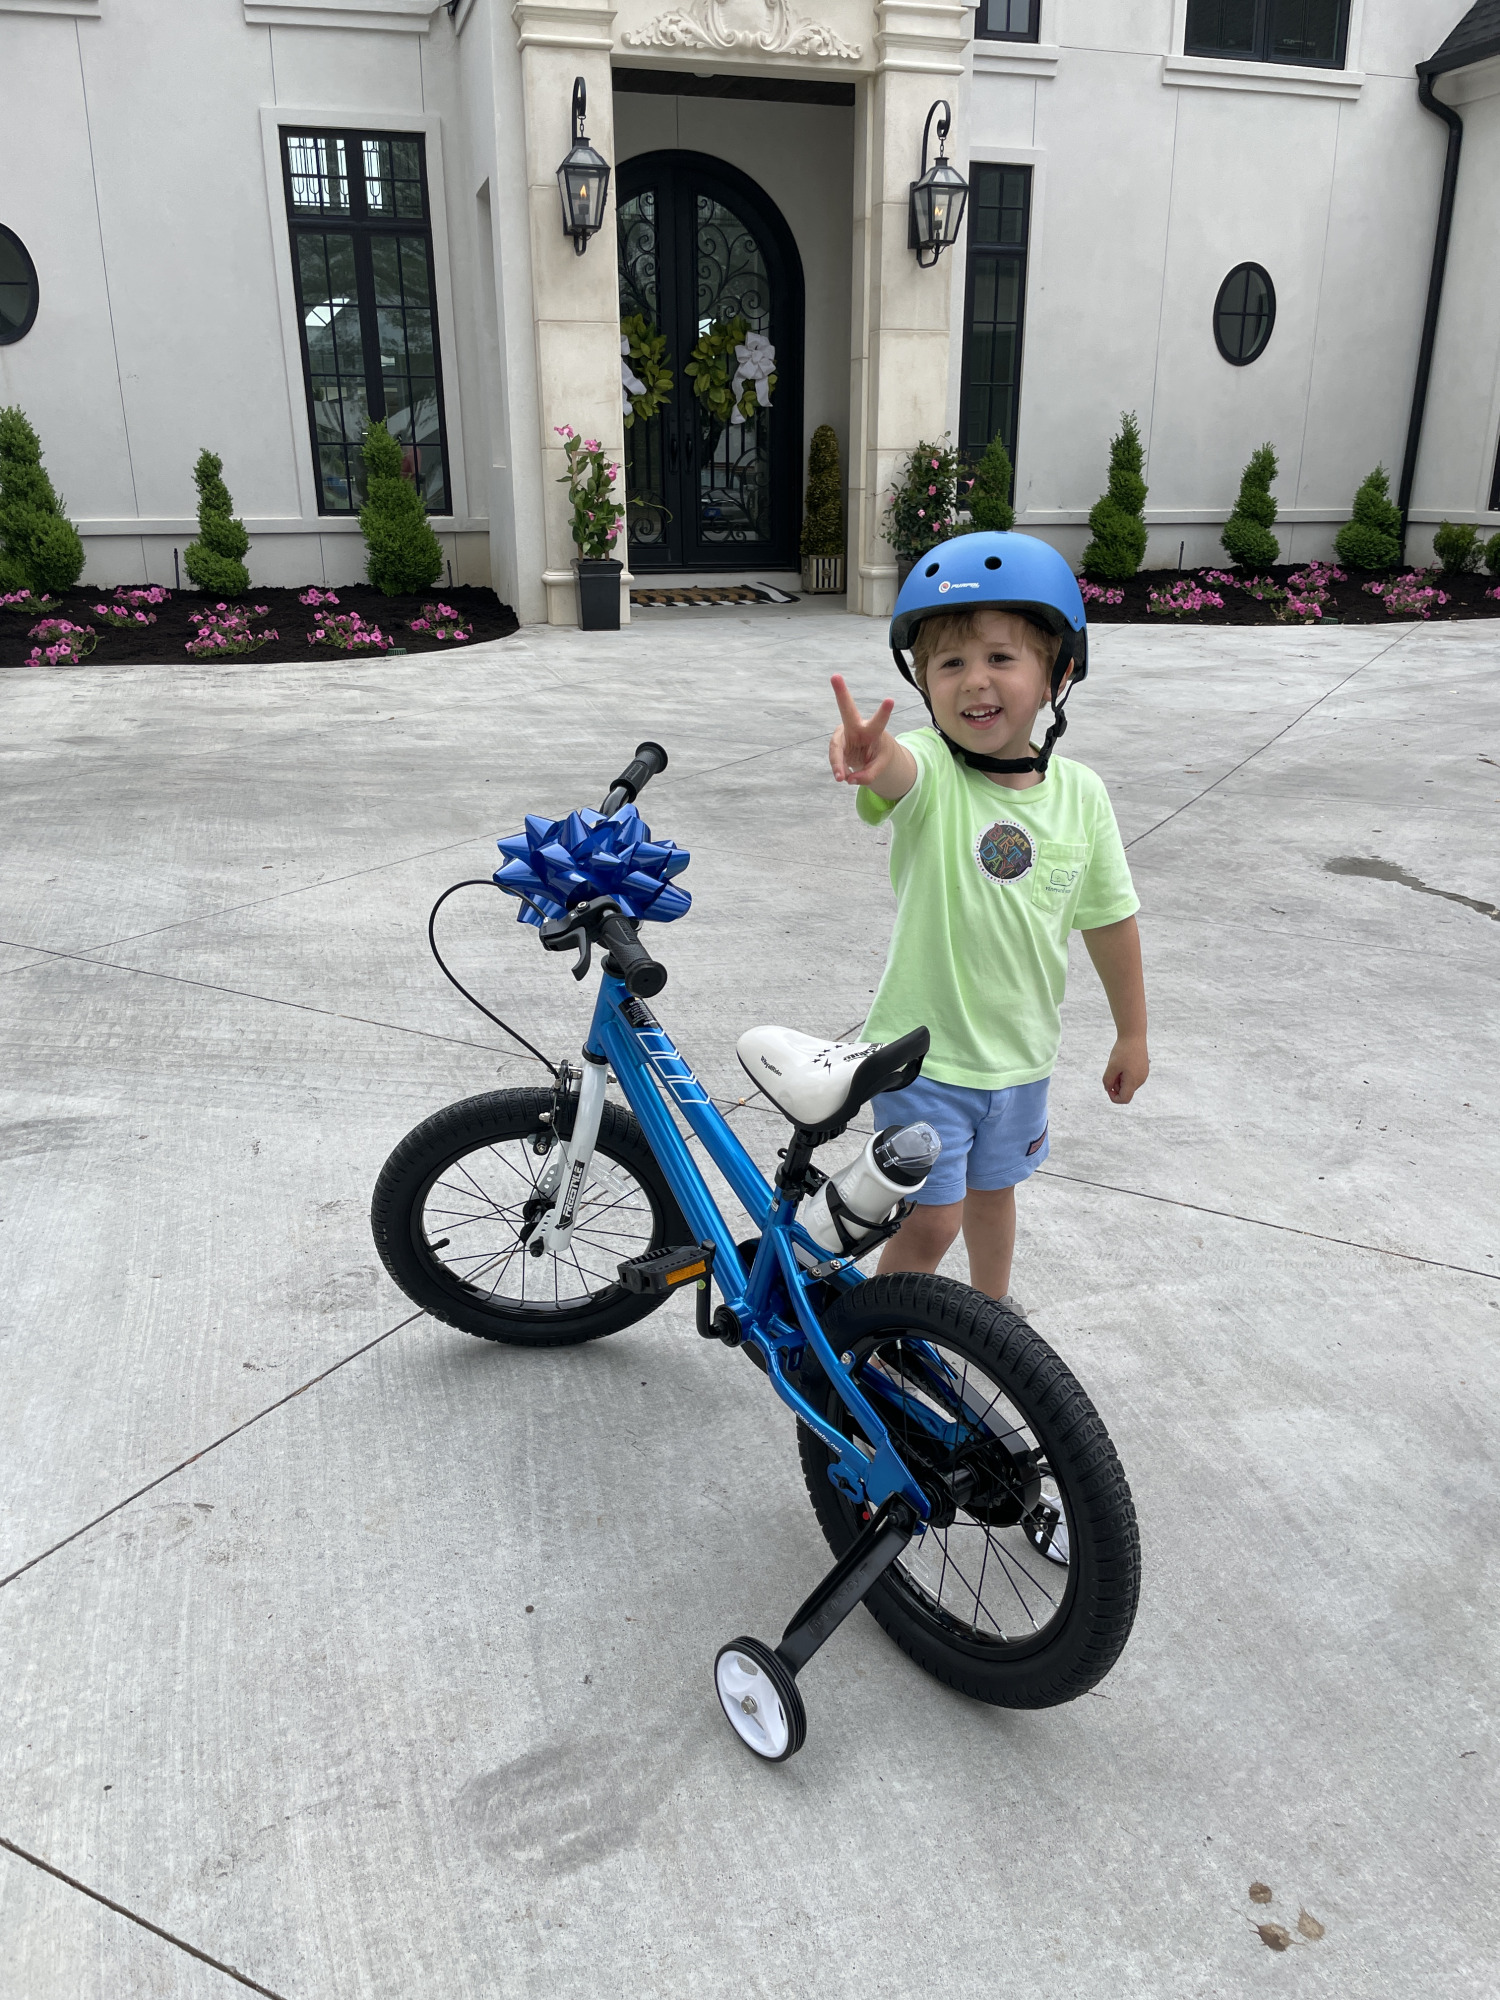 little boy gift ideas, bikes for little boys, bikes with training wheels, Luke gemma | Instagram Recap by popular US life and style blog, The Sweetest Thing: image of a little boy standing next to a blue bike with training wheels and holding up a the peace sign with his fingers and wearing a blue bike helmet, neon green shirt, and blue shorts. 